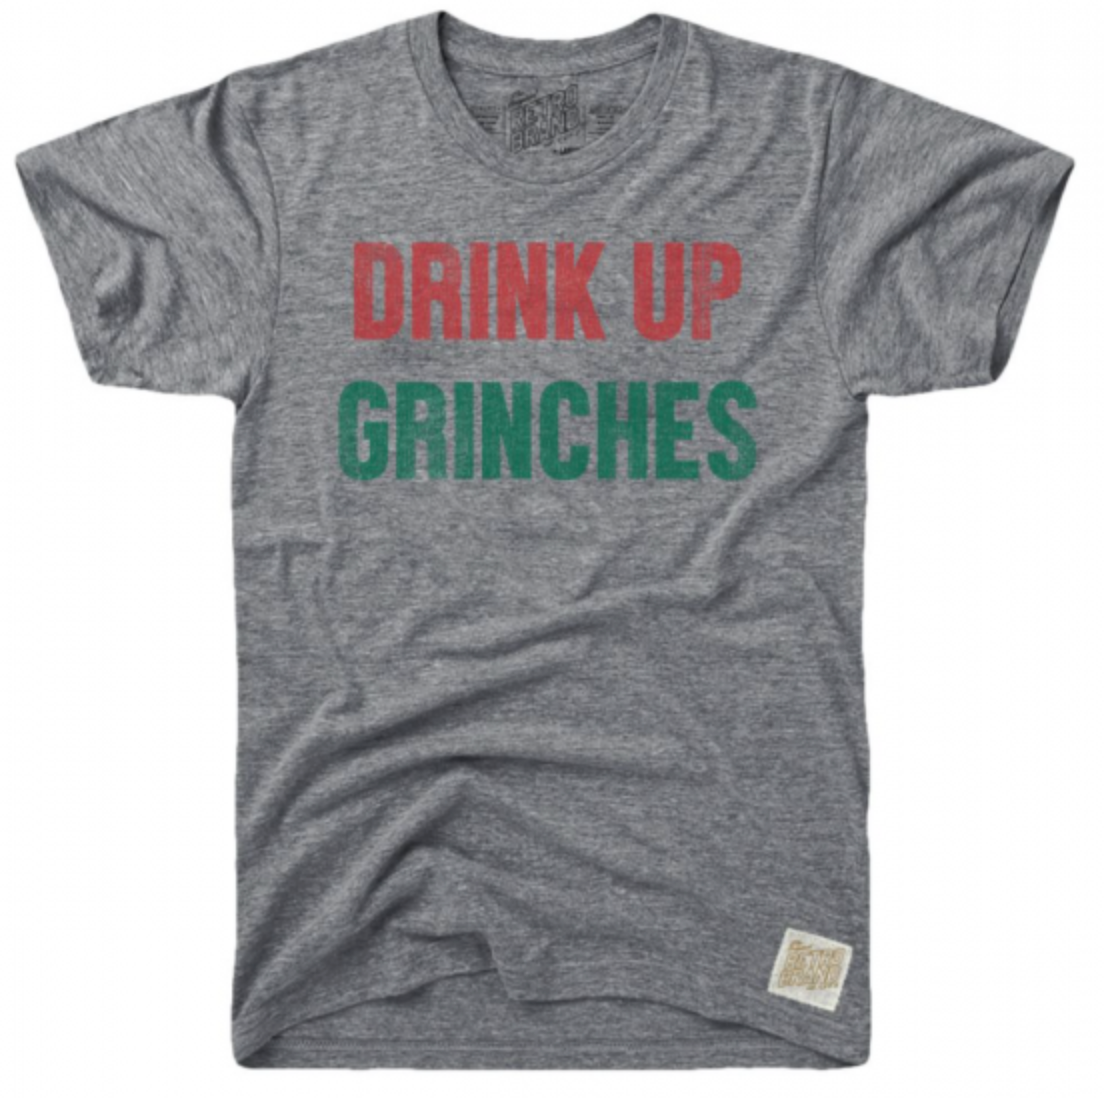 Drink Up Grinches Tri-Blend Tee